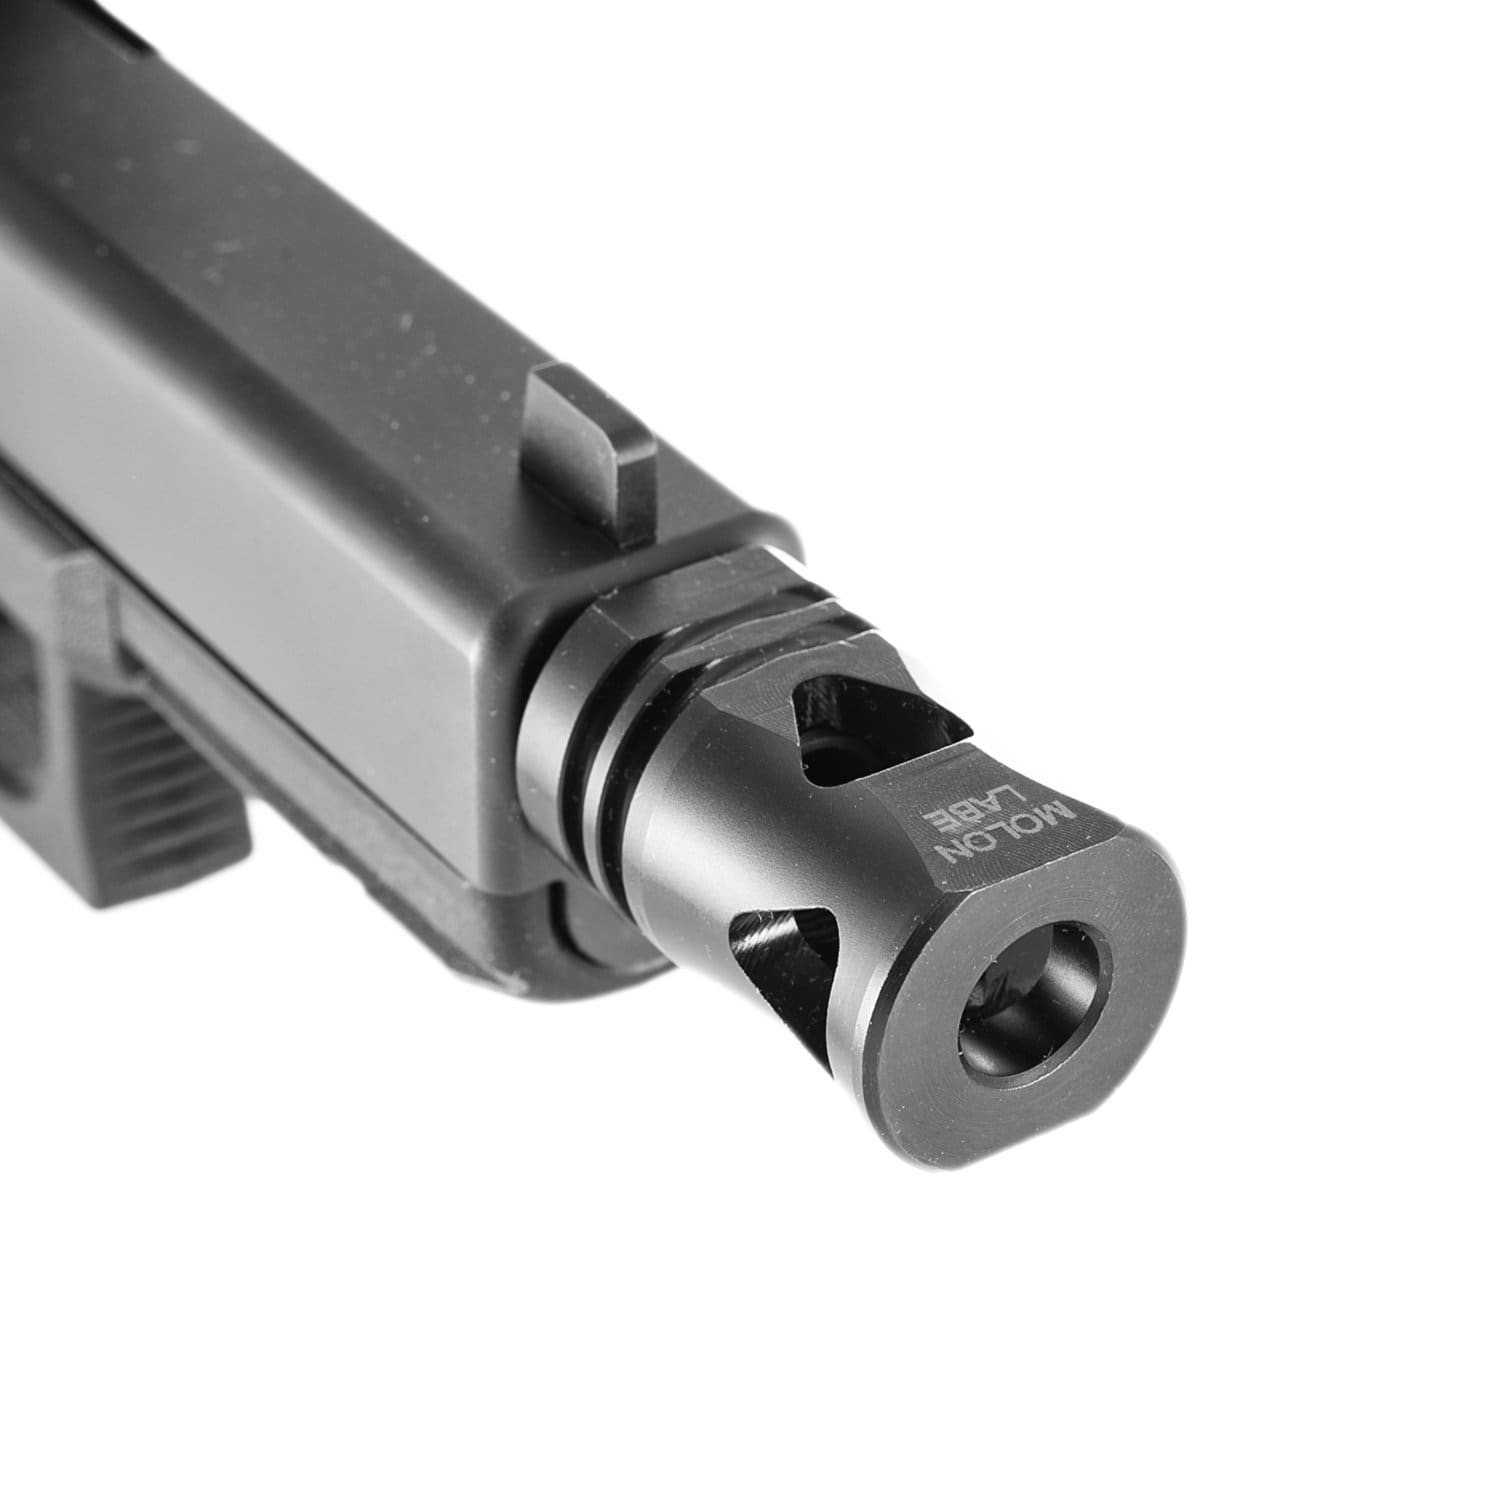 A Beginner's Guide to Muzzle Brakes